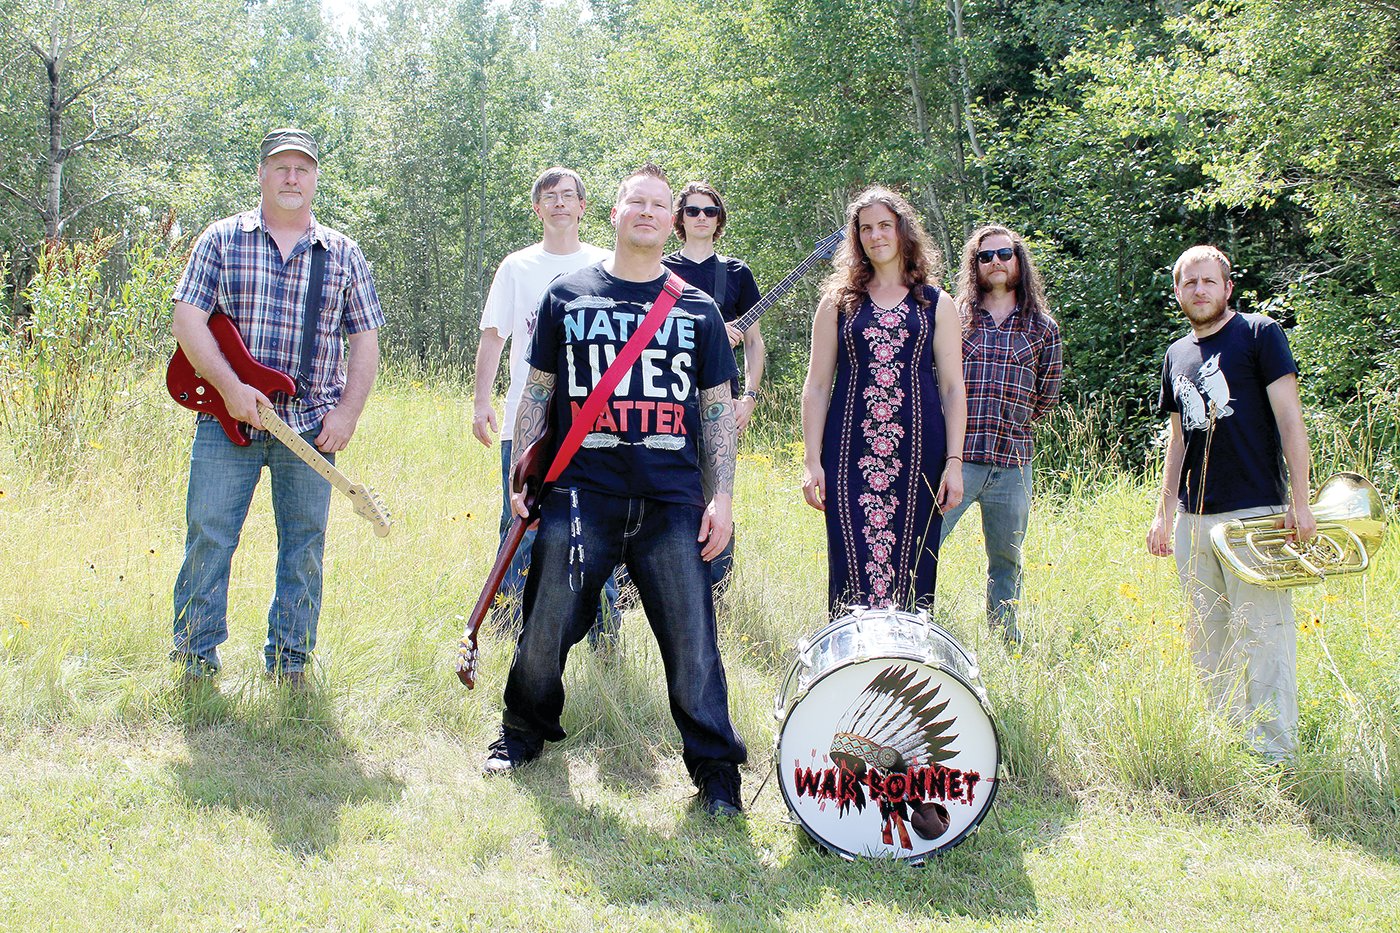 War Bonnet and their performance ensemble. Left to right are: Eric Krenz, Tony Parson, Chaz Wagner, Sean Zarn, Becky Frichek, Tom Frichek and Alex Mahne.